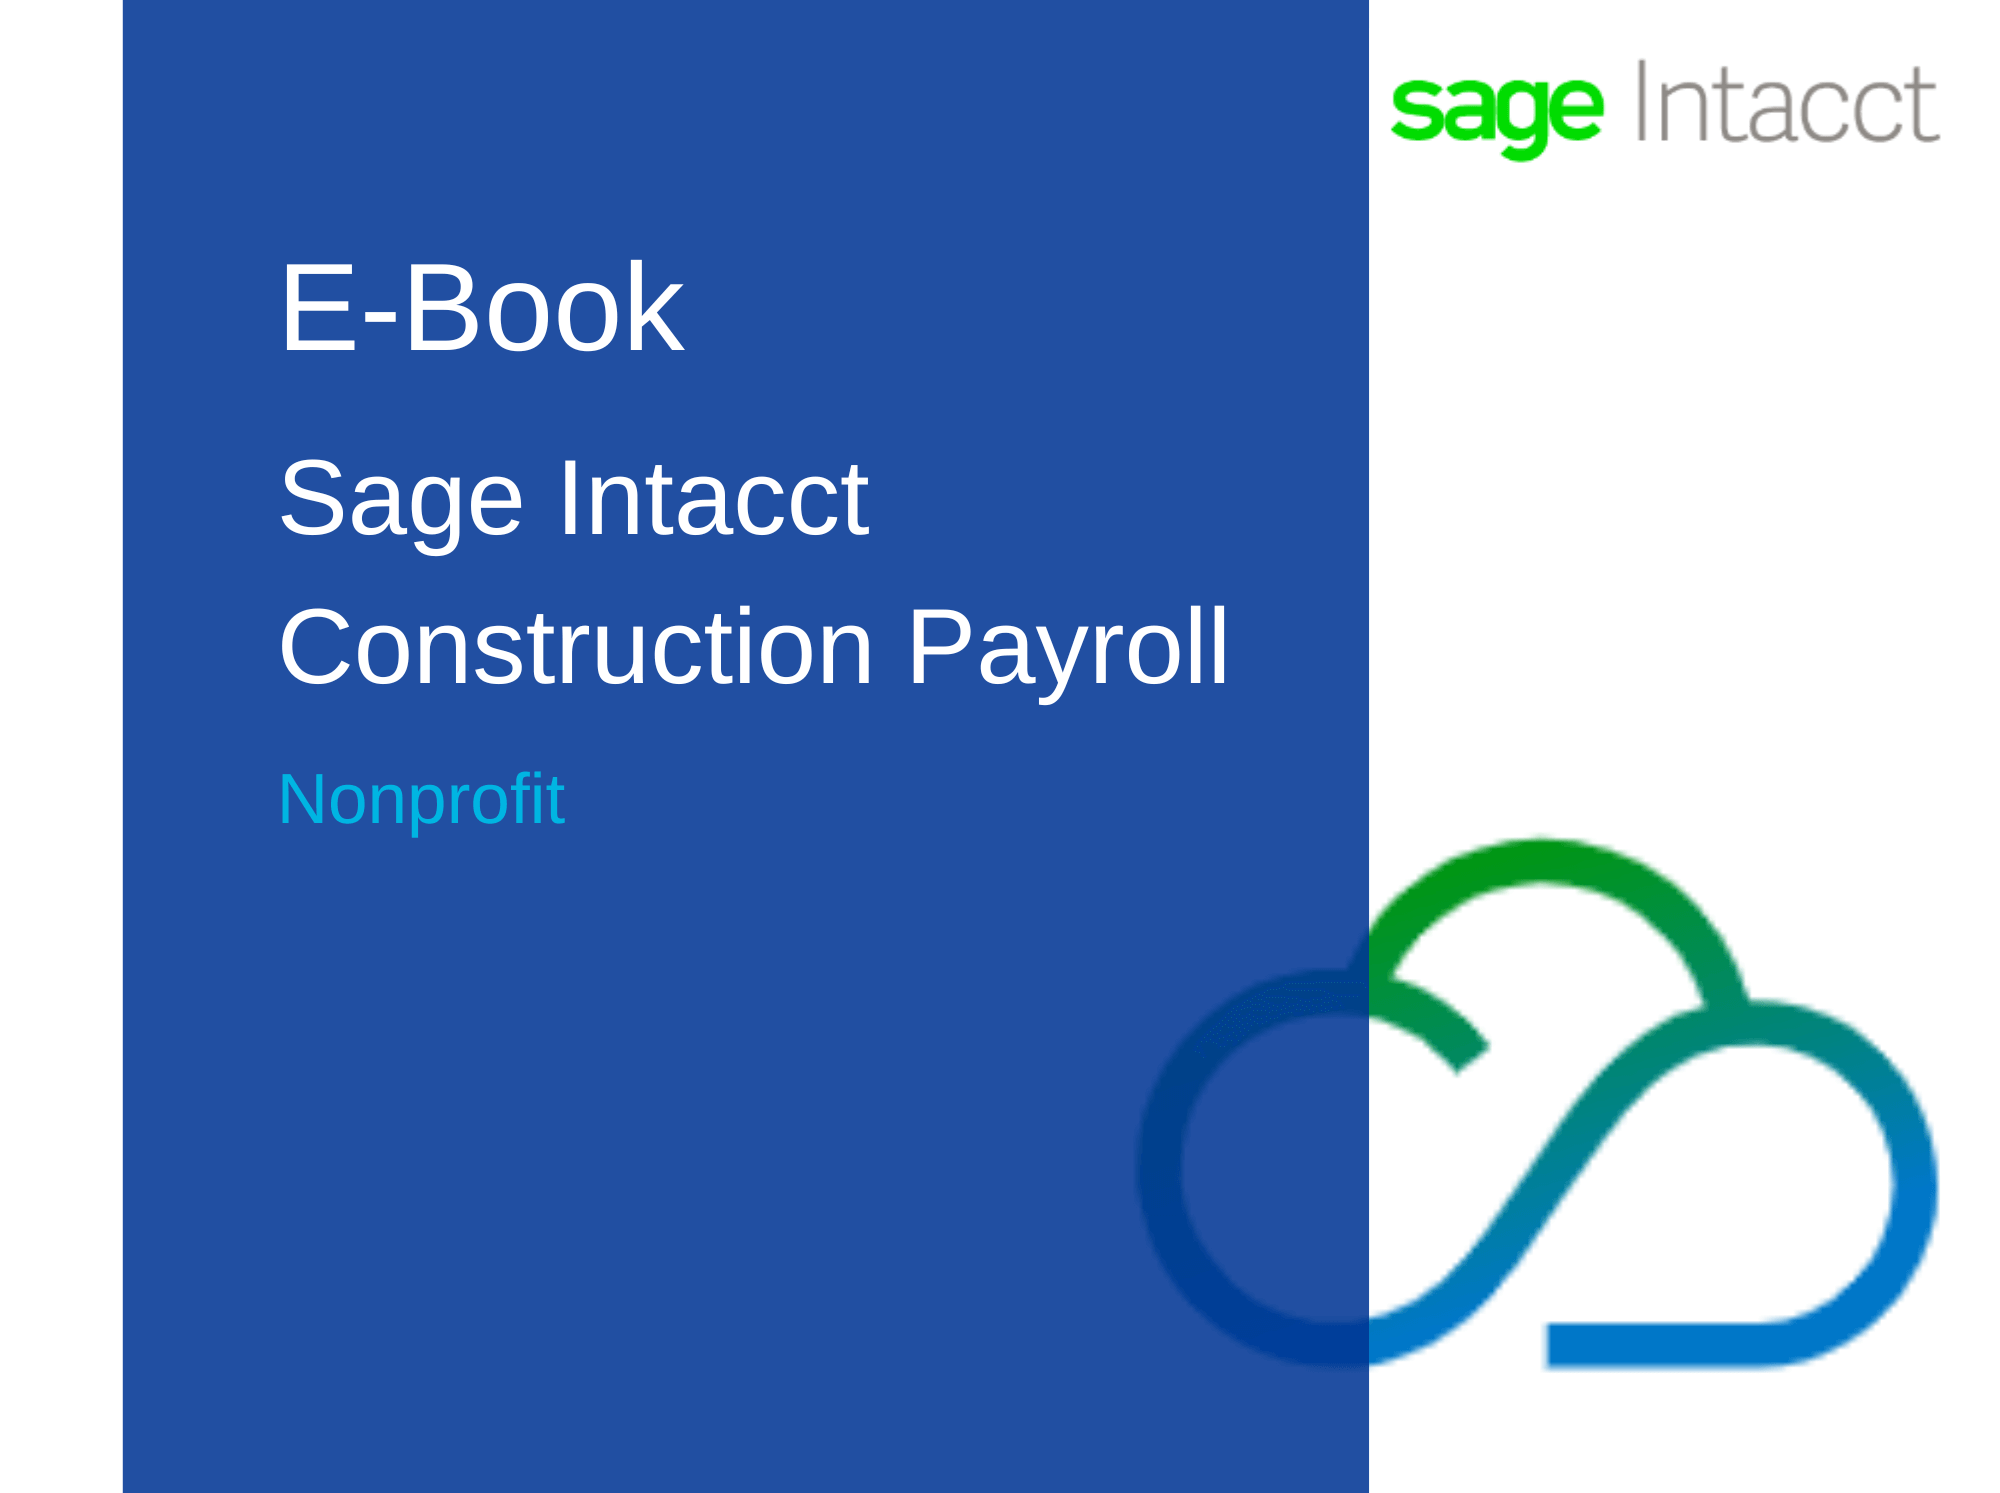 E-Book: Sage Intacct on Construction Payroll